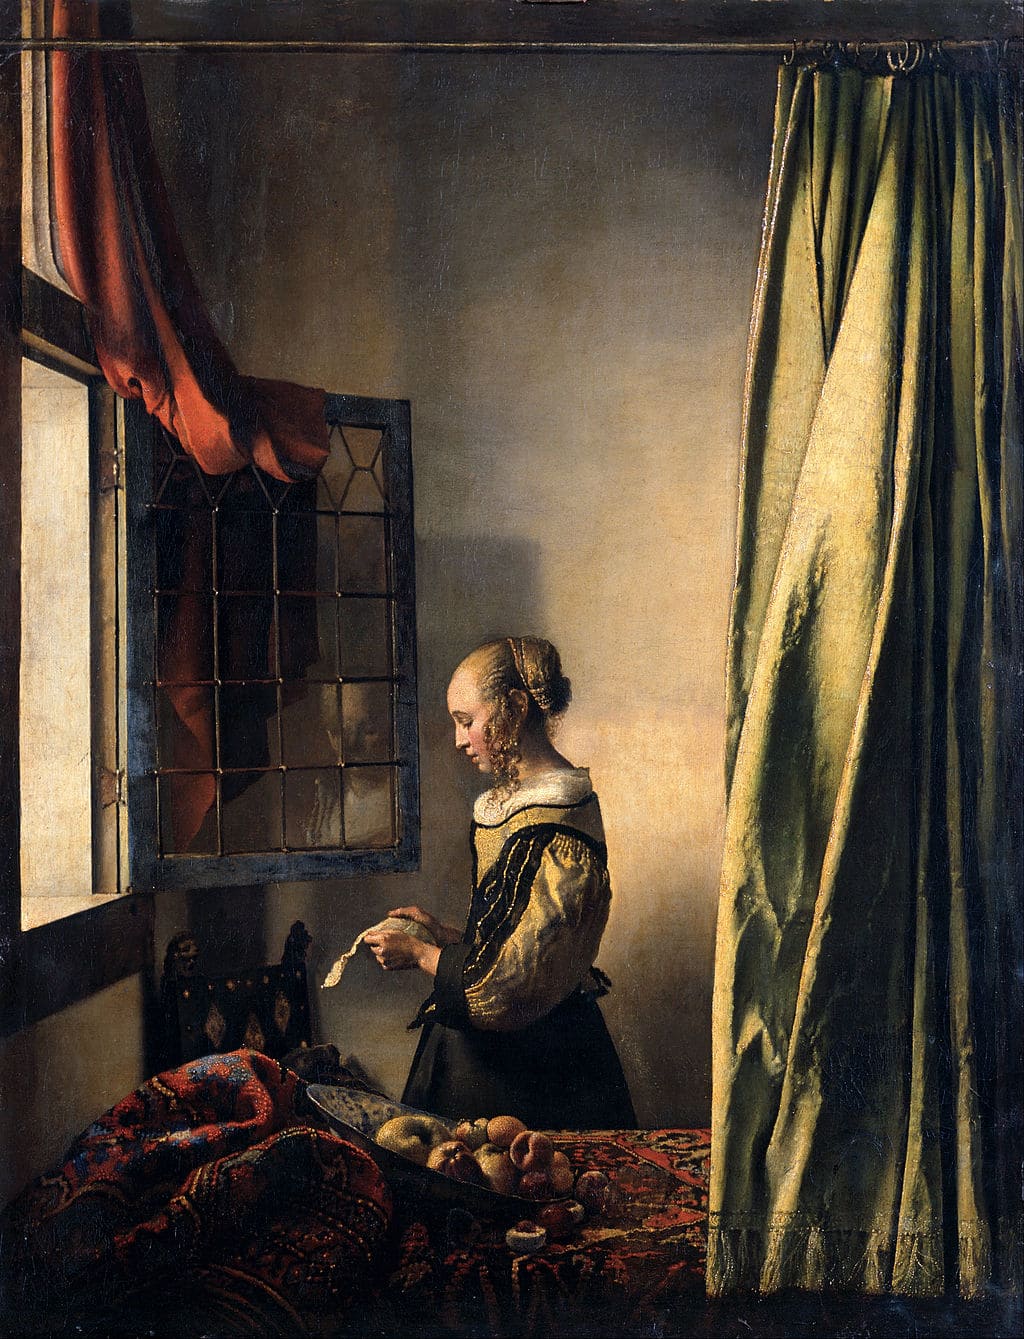 Johannes Vermeer, The Reader at the Window, 1657-1659, Gemaldegalerie Alte Meister, Dresden under the surface of